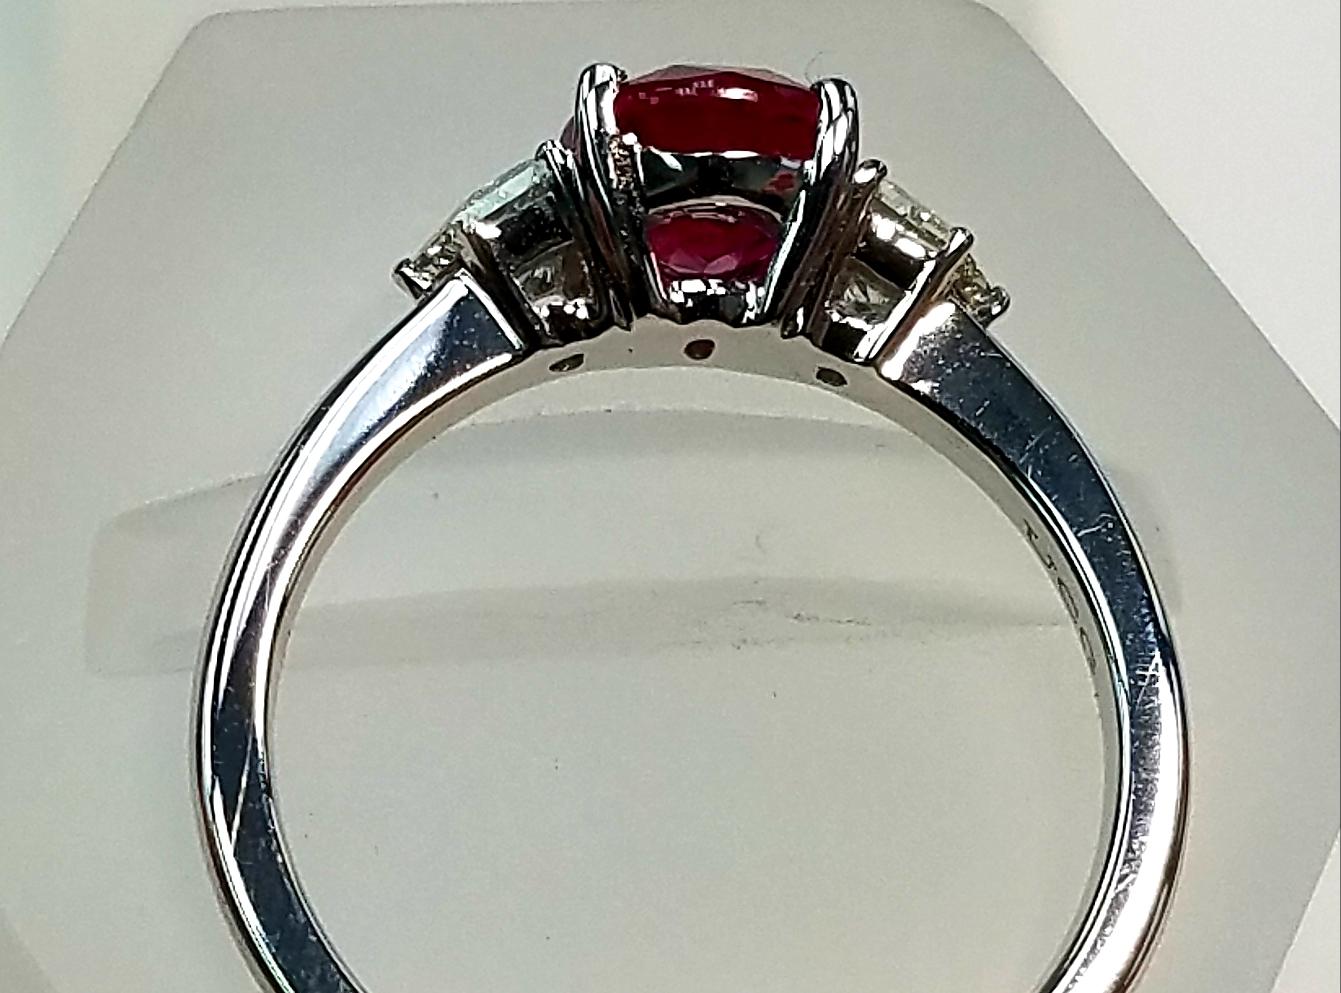 18 Karat White Gold Three Stone Oval Cut Ruby and Diamond Ring
1.80 Carats of Rubies
0.46 Carats of Half Moon Fancy Cut Genuine Diamonds
Oval Cut
18 Karat White Gold 